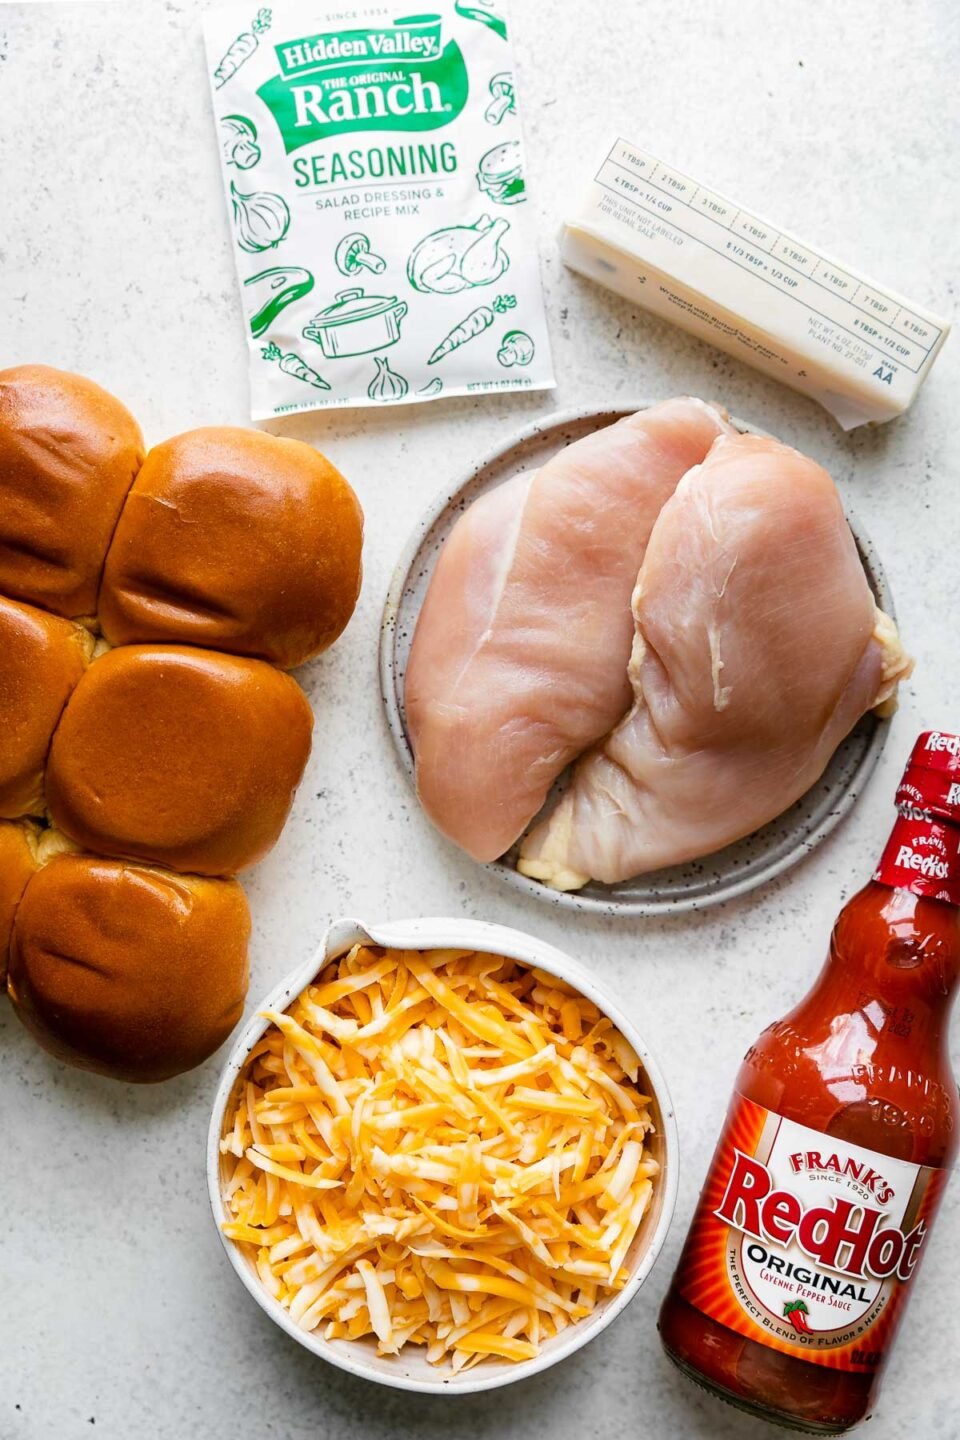 Buffalo Chicken Slider ingredients arranged on a white textured surface: unsalted butter, boneless, skinless chicken breasts, ranch seasoning, Frank's RedHot Original Cayenne Pepper Sauce, dinner rolls, Colby jack cheese.